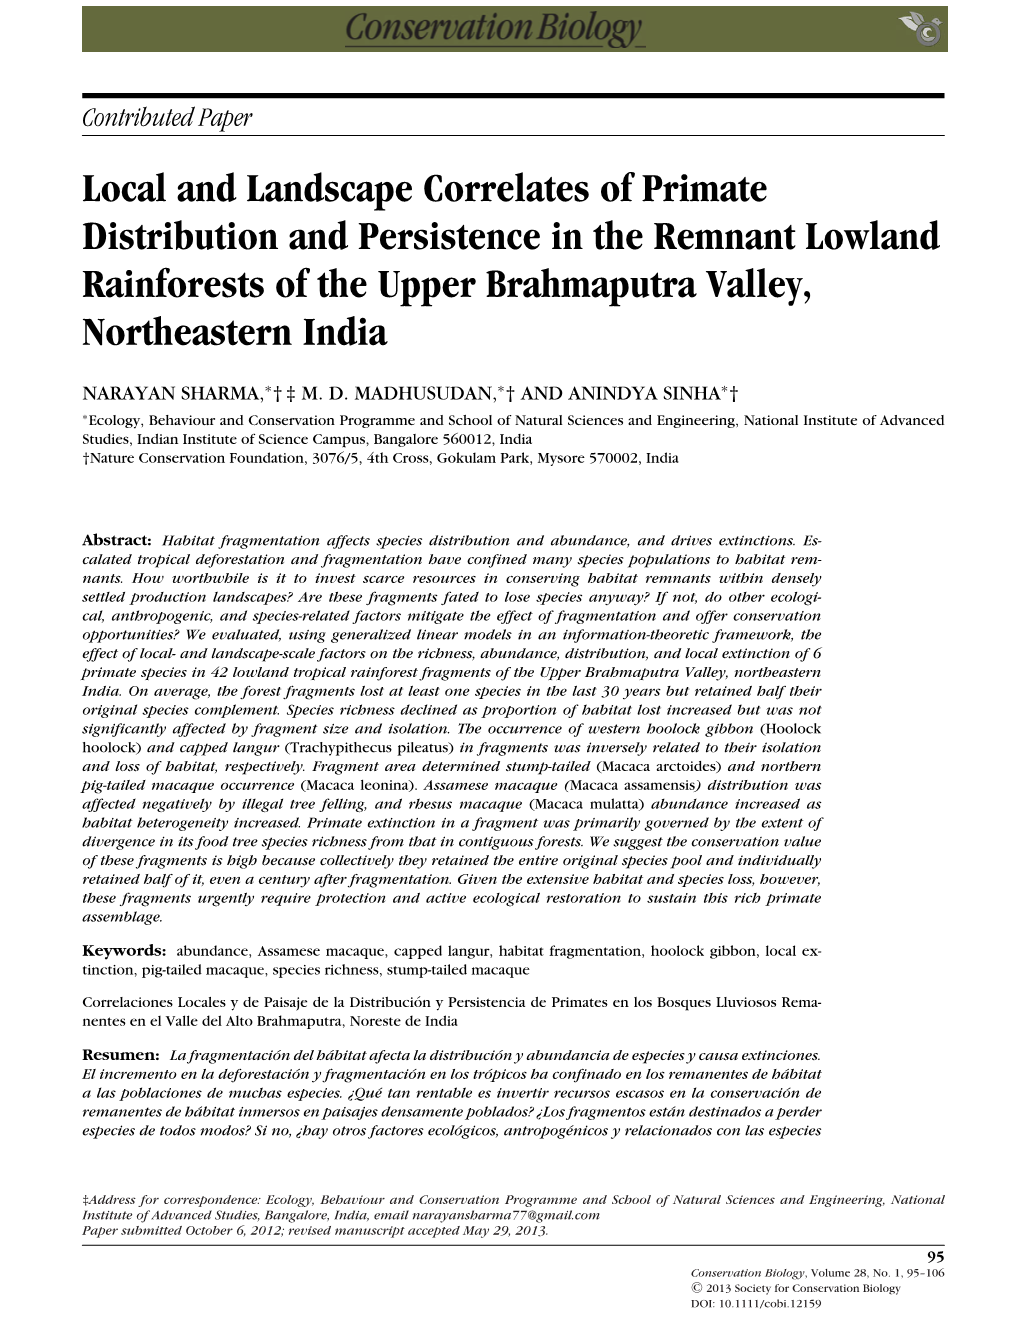 Local and Landscape Correlates of Primate Distribution and Persistence in the Remnant Lowland Rainforests of the Upper Brahmaputra Valley, Northeastern India